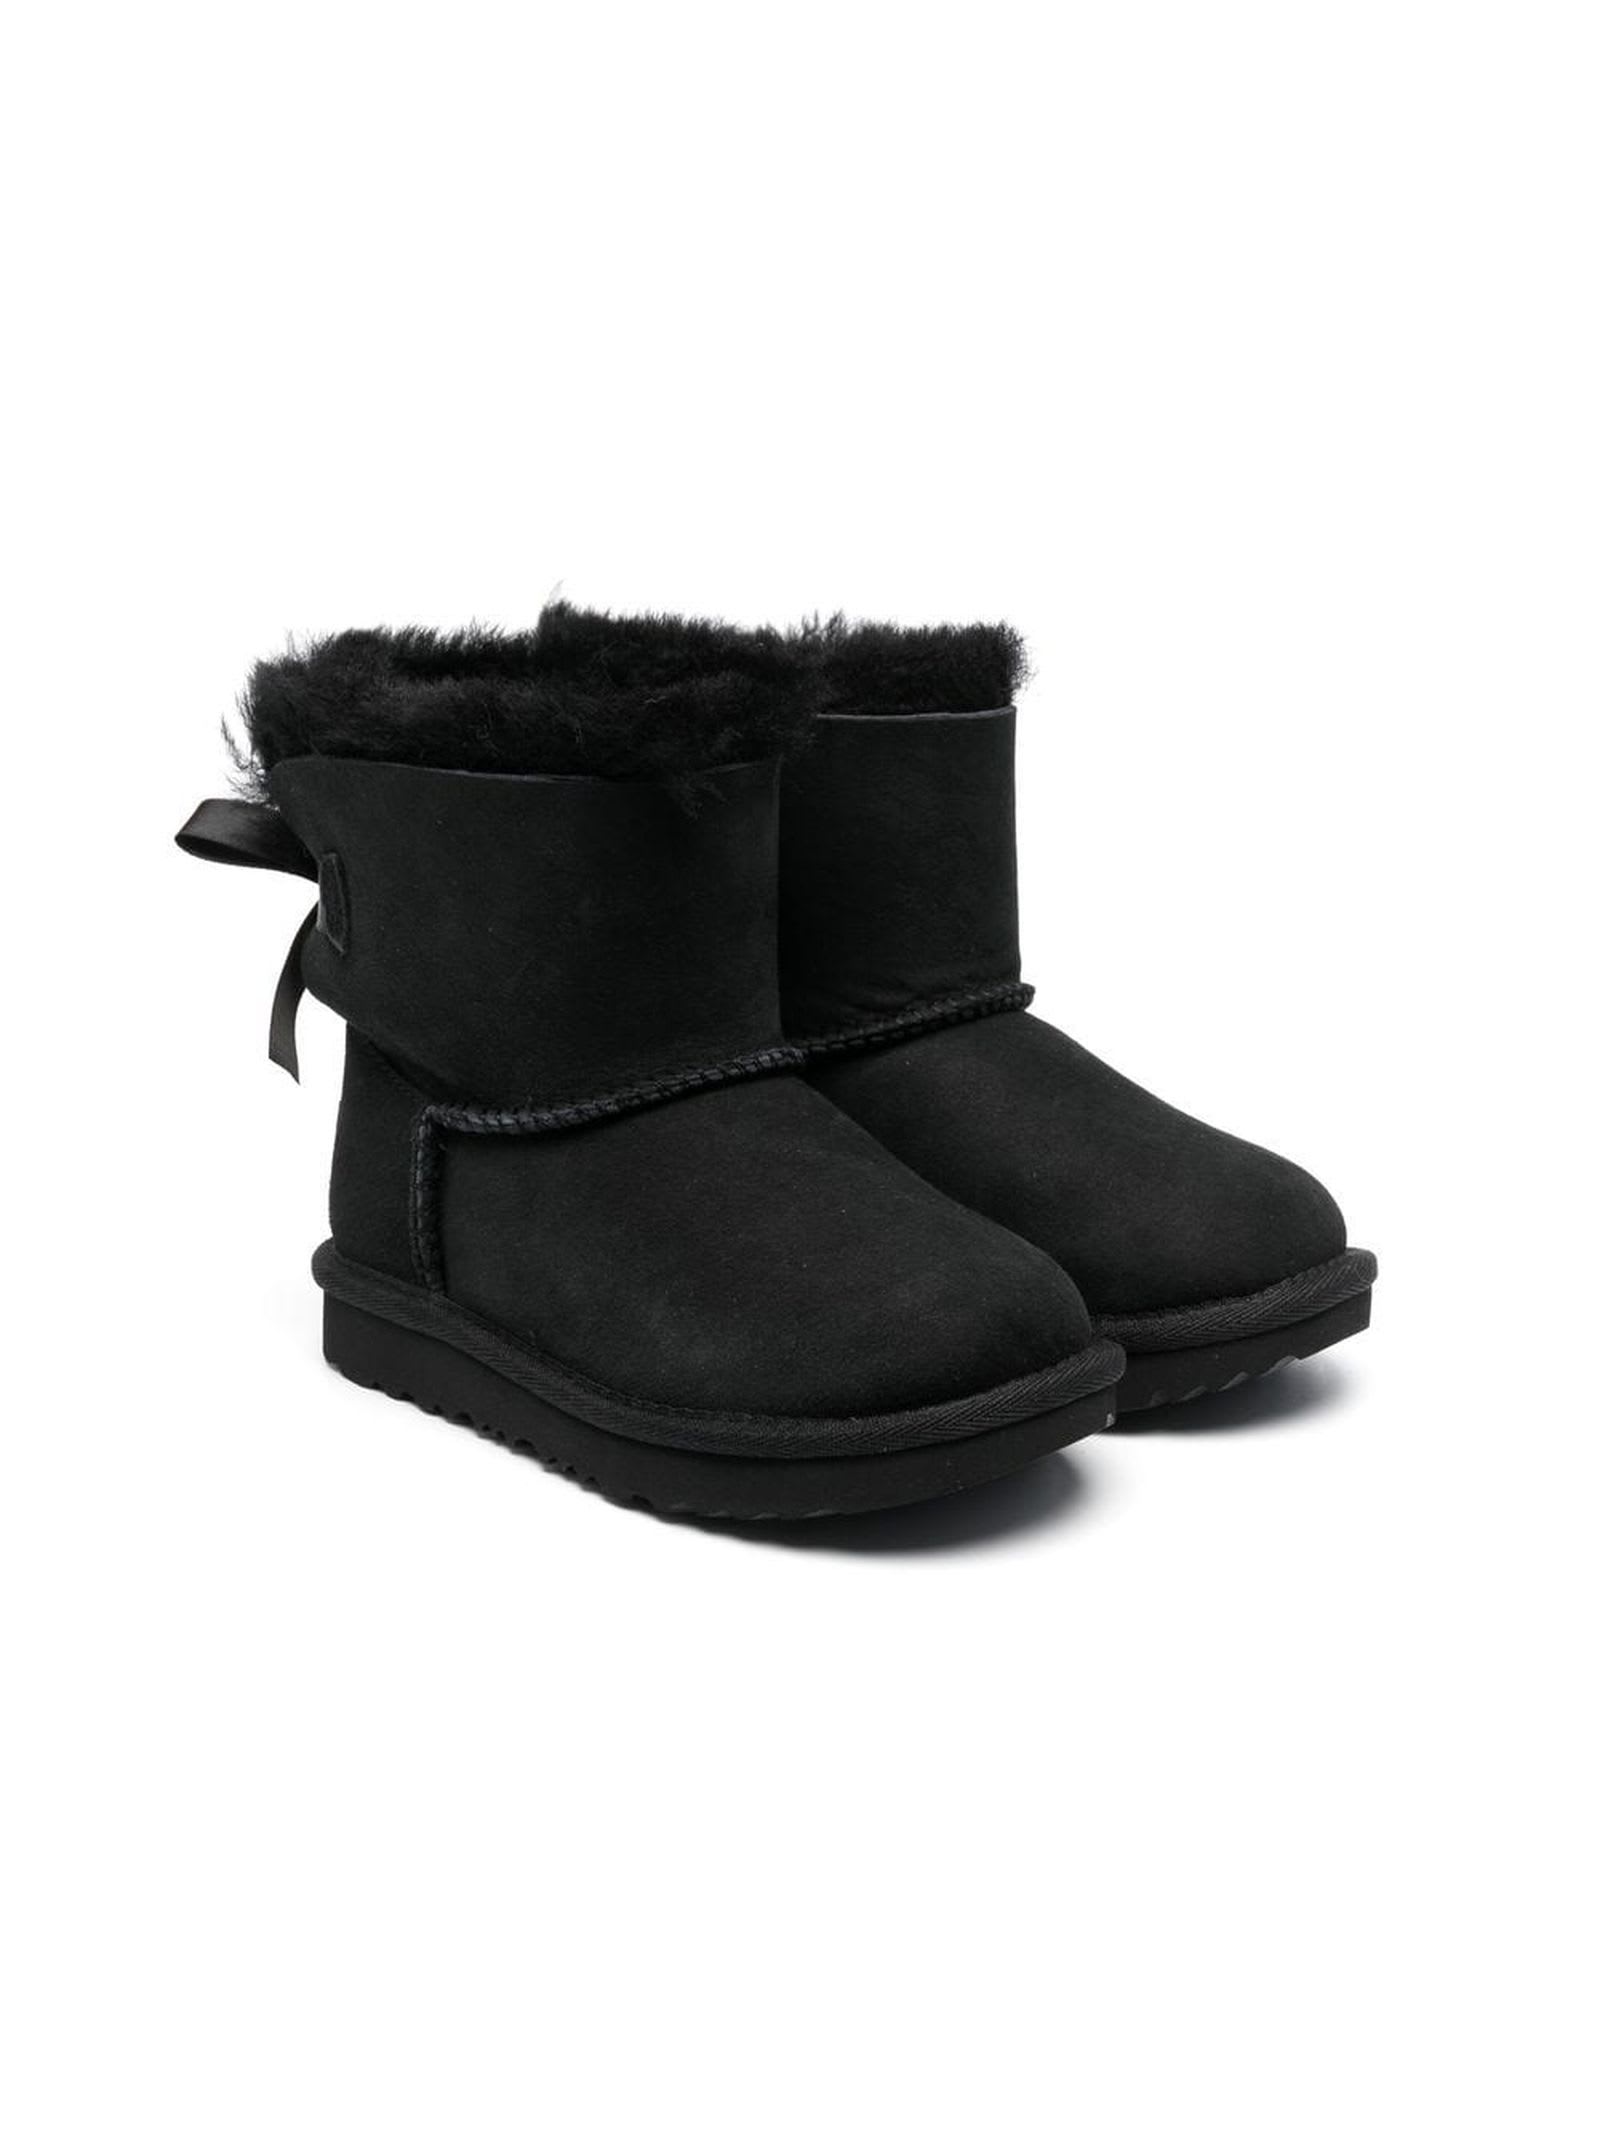 UGG BLACK LEATHER ANKLE BOOTS